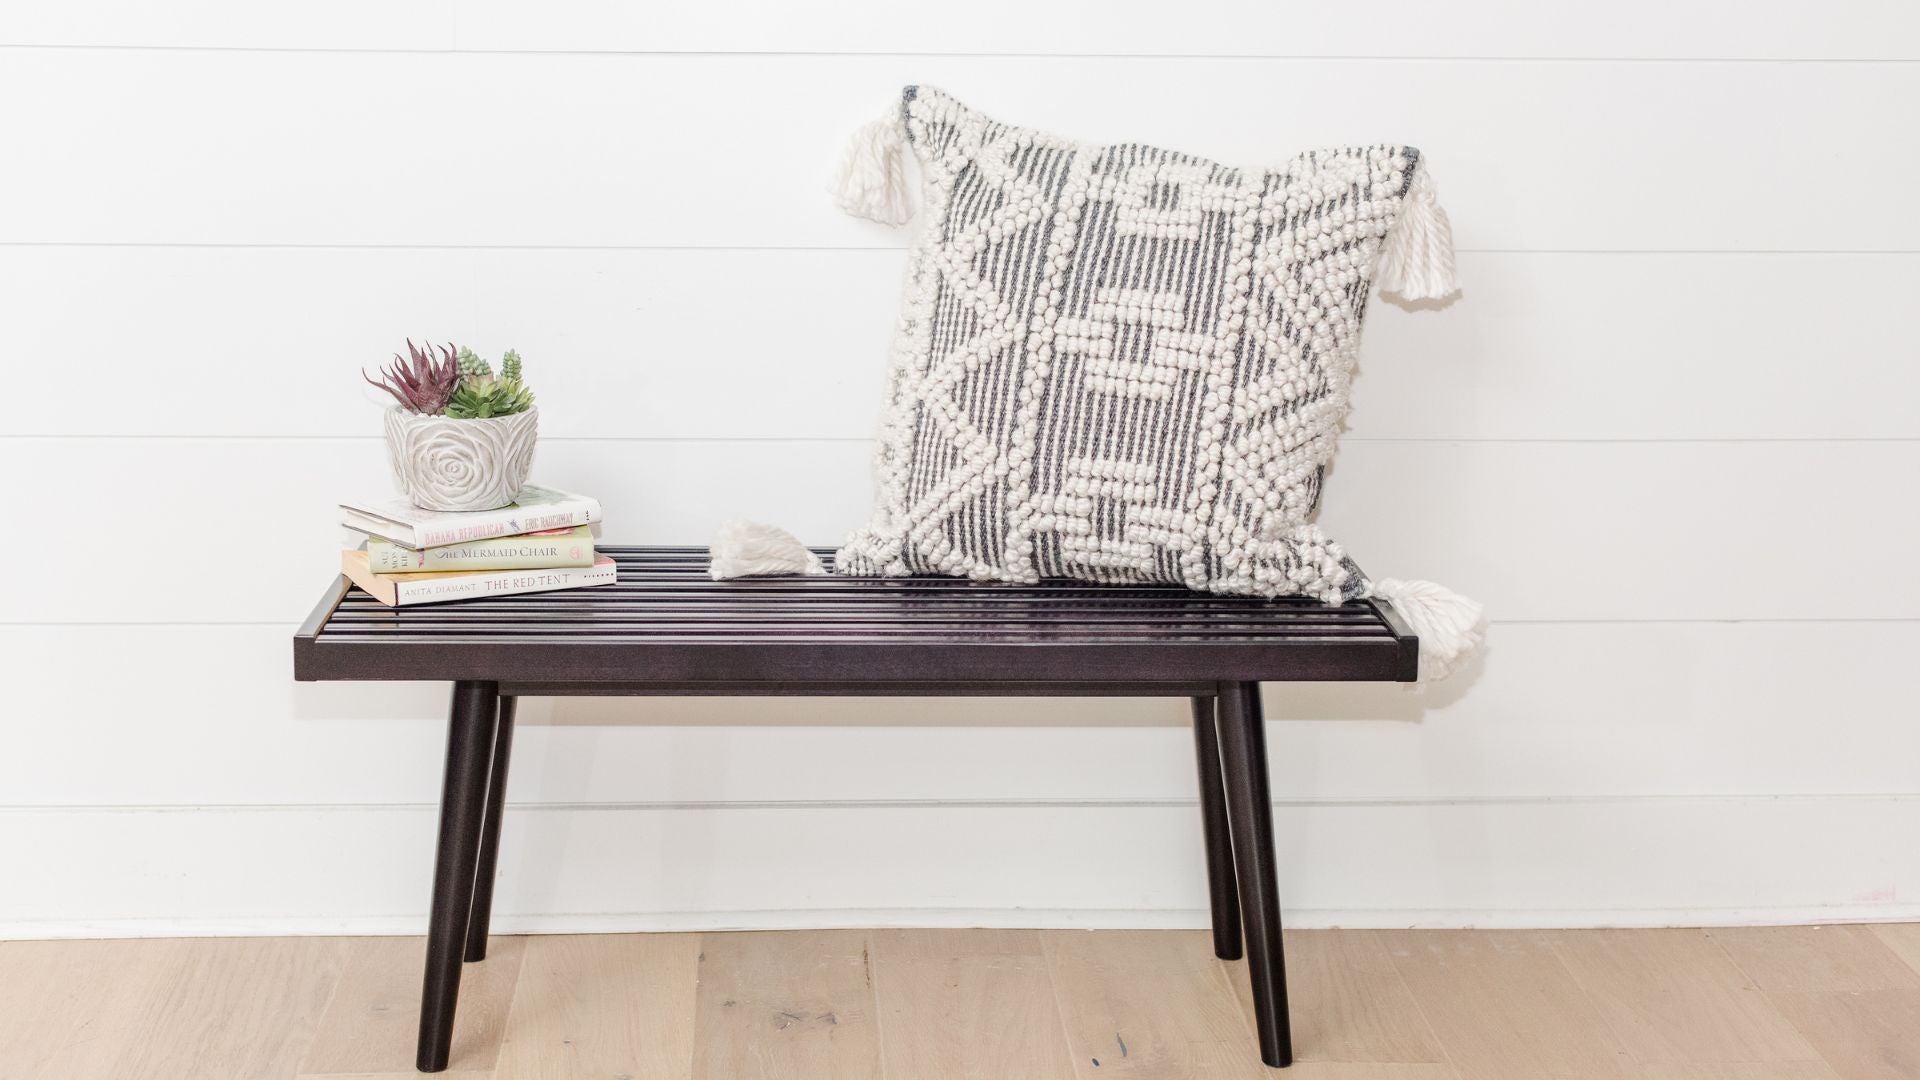 Solid wood black entryway bench with books, pillow, and plant